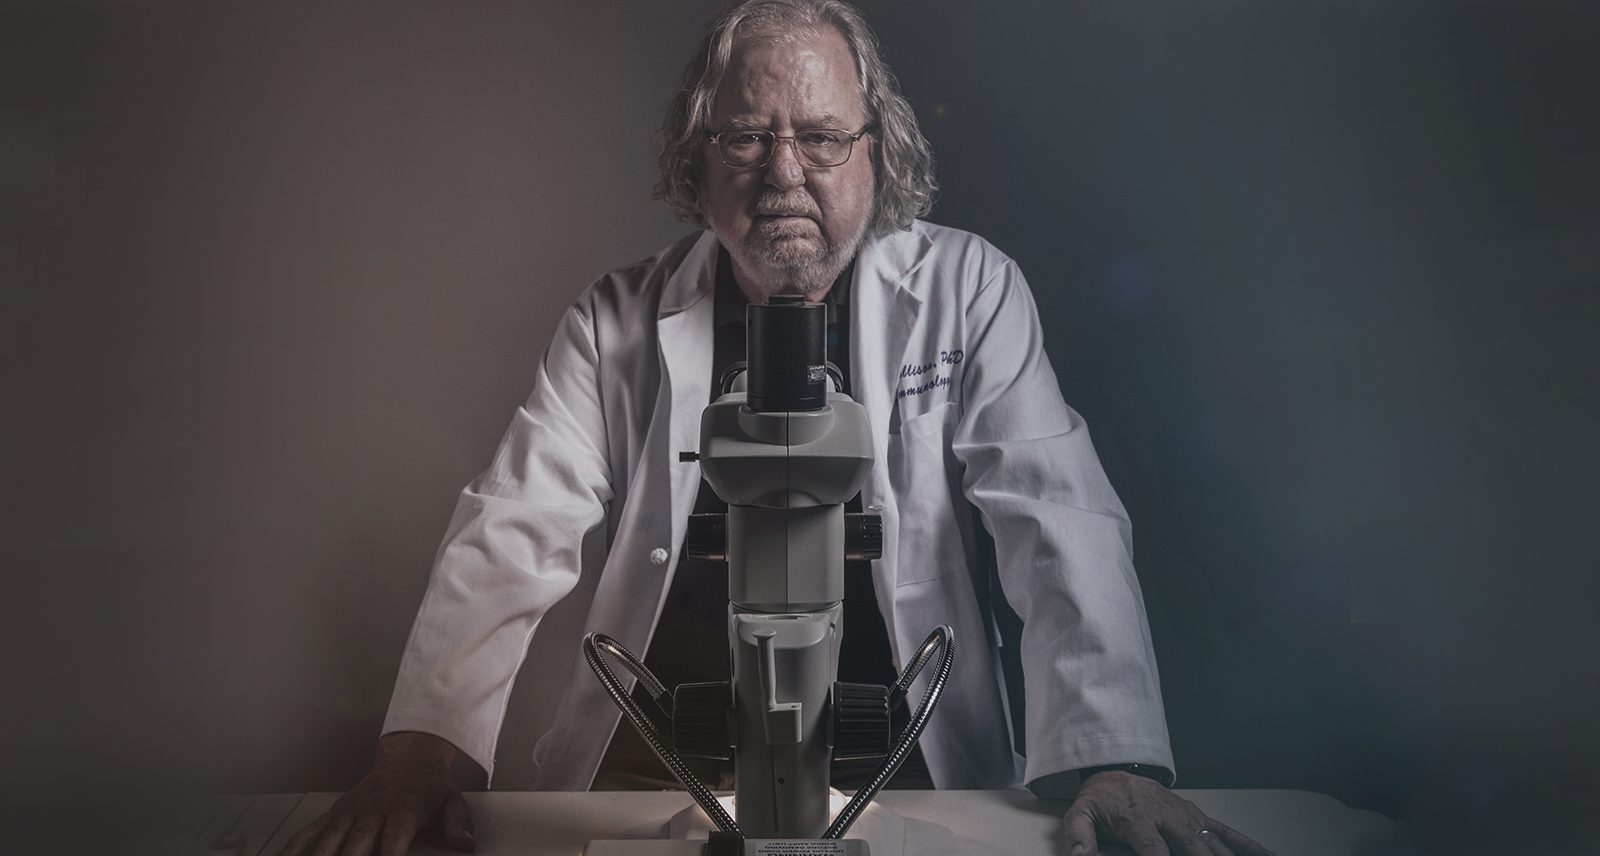 Jim Allison Won a Nobel Prize for His Cancer Breakthrough. But It Took Years for the Medical Community to Listen